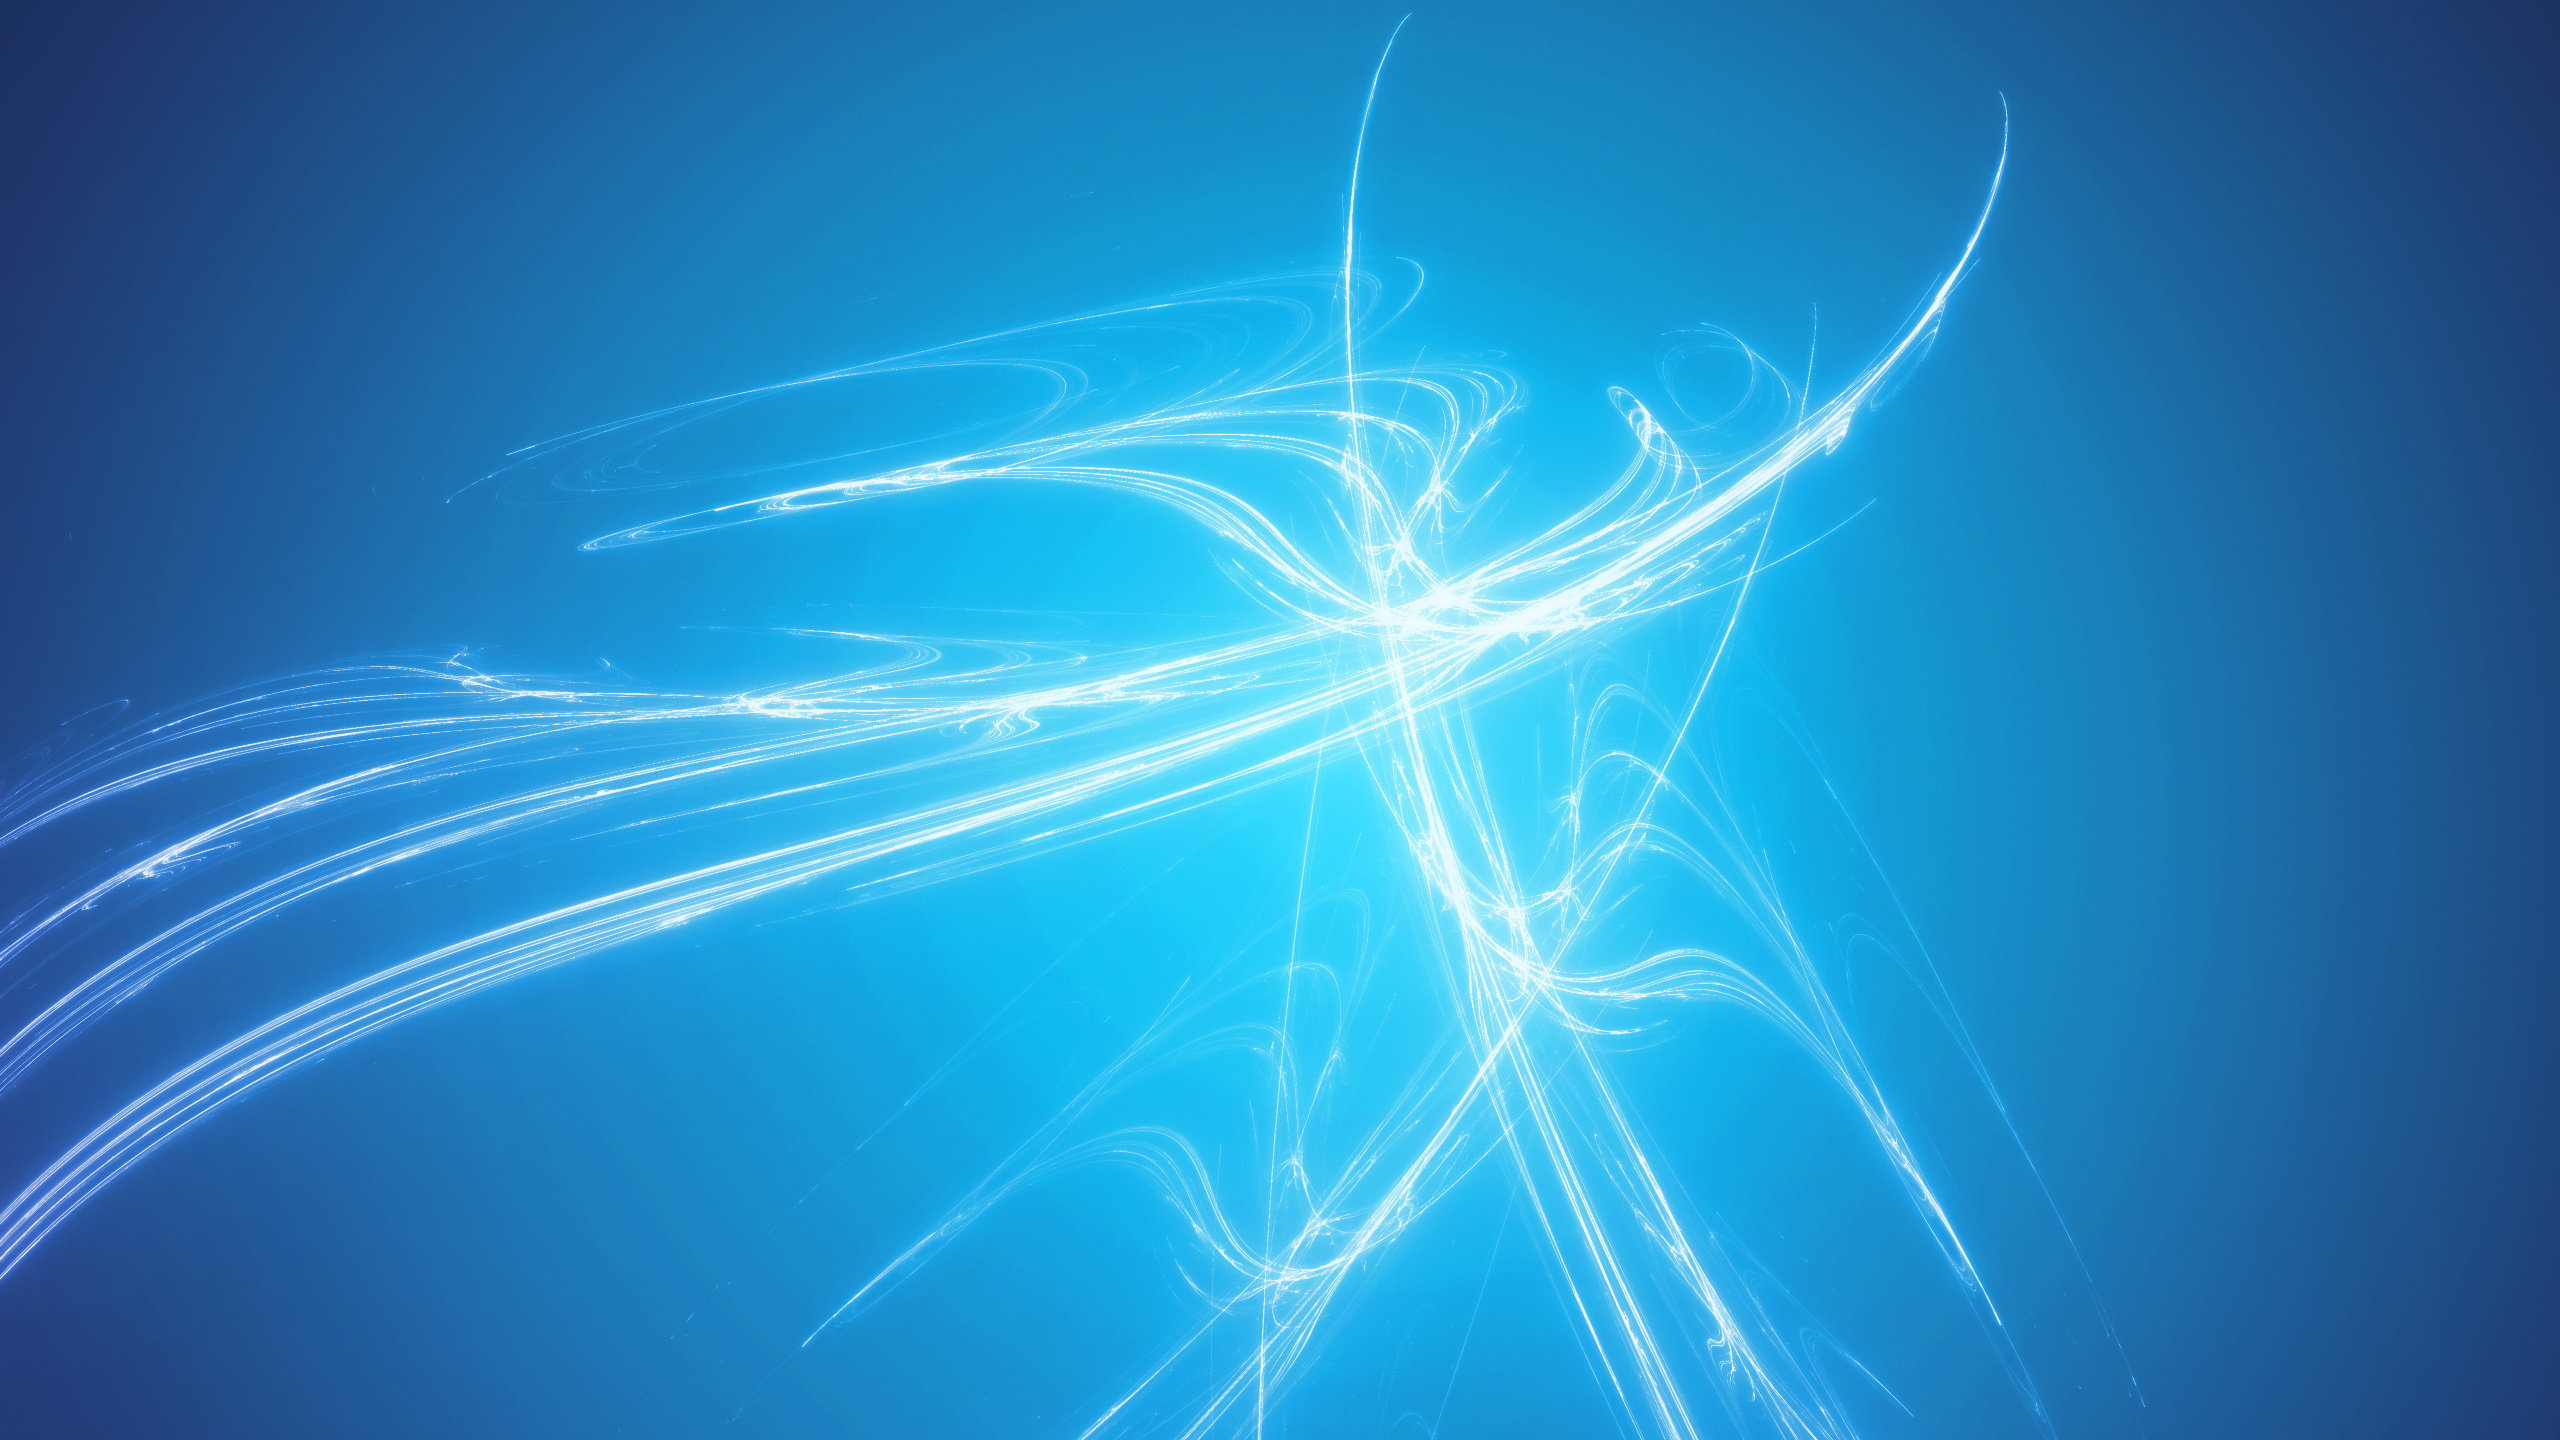 Free download Blue background ID:294180 hd 2560x1440 for PC